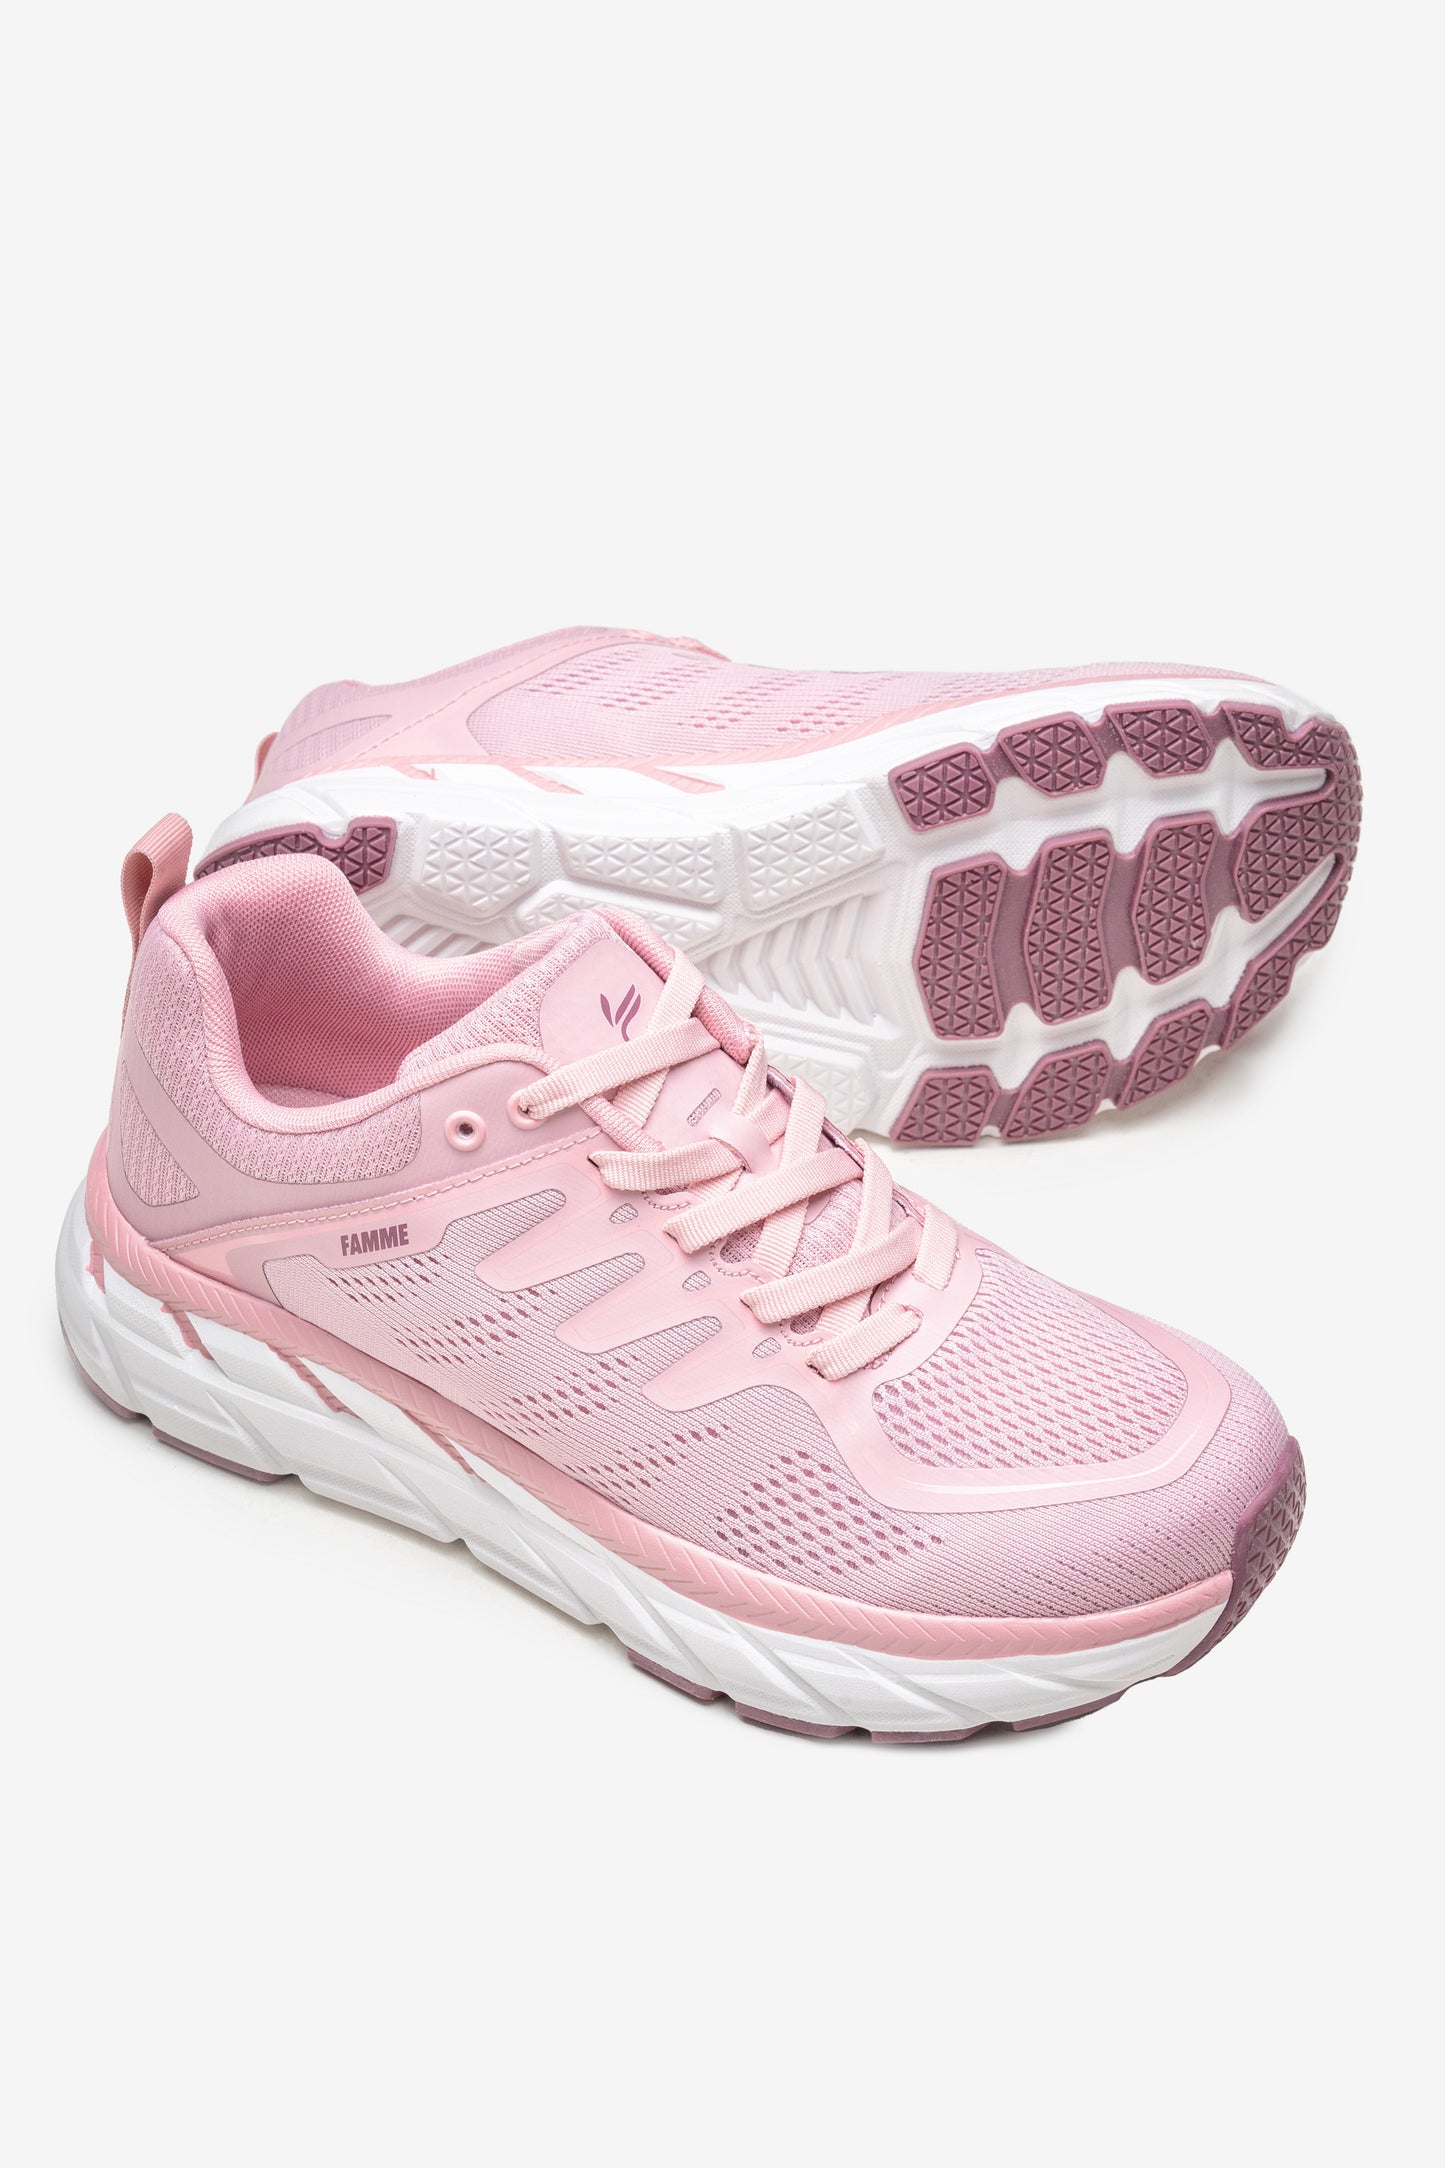 Pink Endorphin RX1 Shoes - for dame - Famme - Shoes